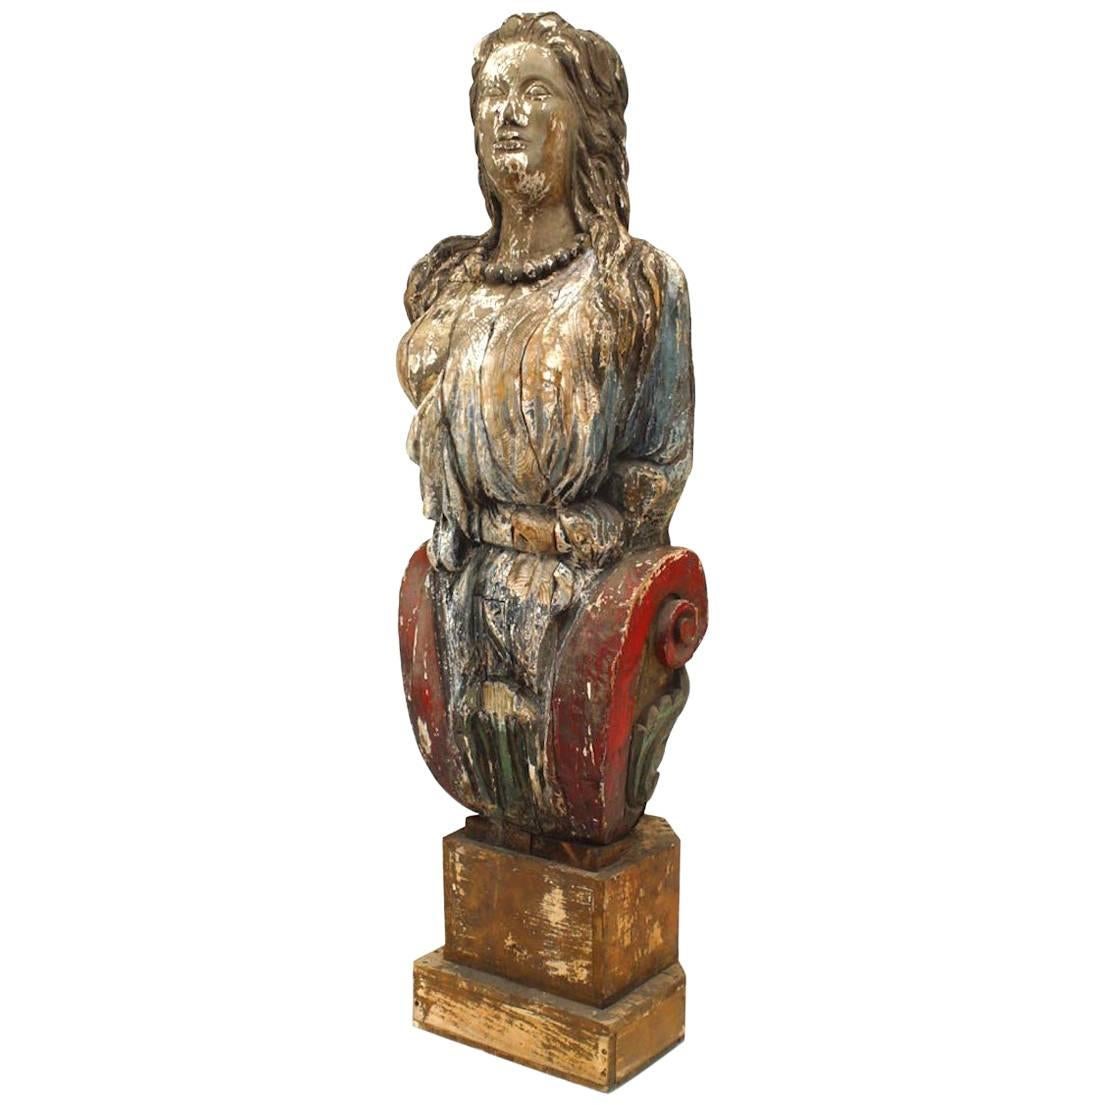 English Country Style '19th Century' Carved and Painted Figurehead